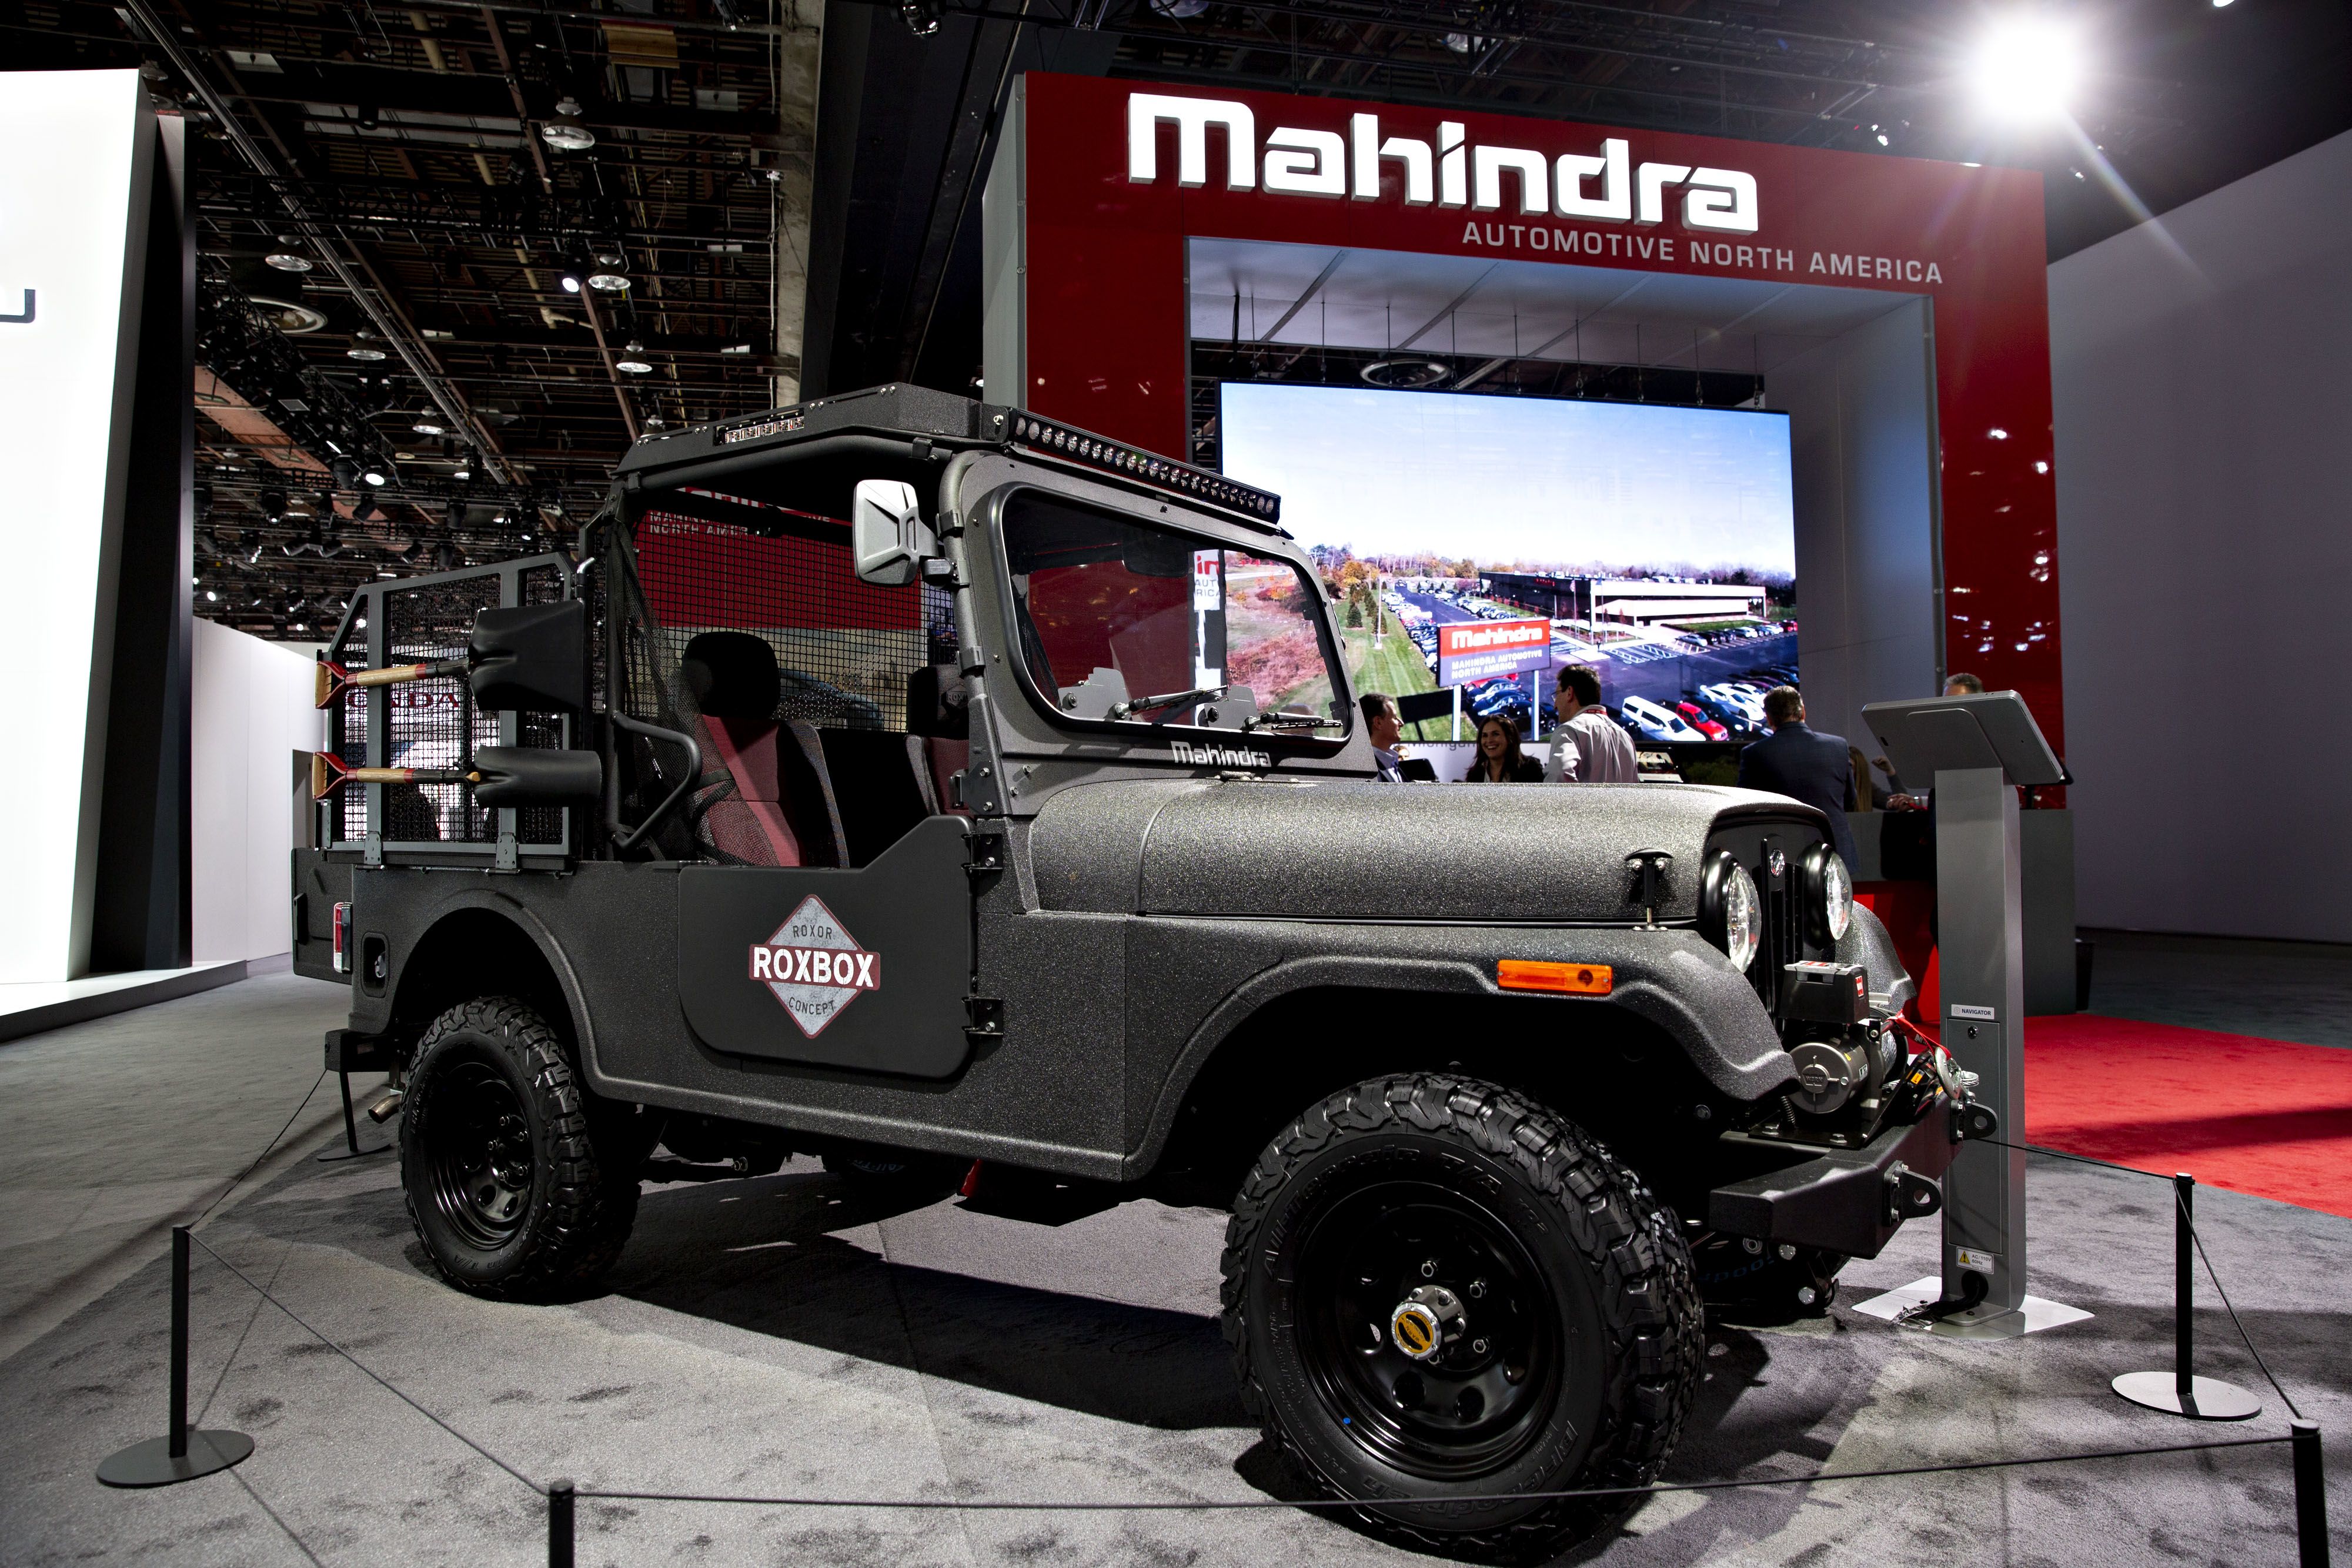 Indian automaker Mahindra considers second US plant in Michigan